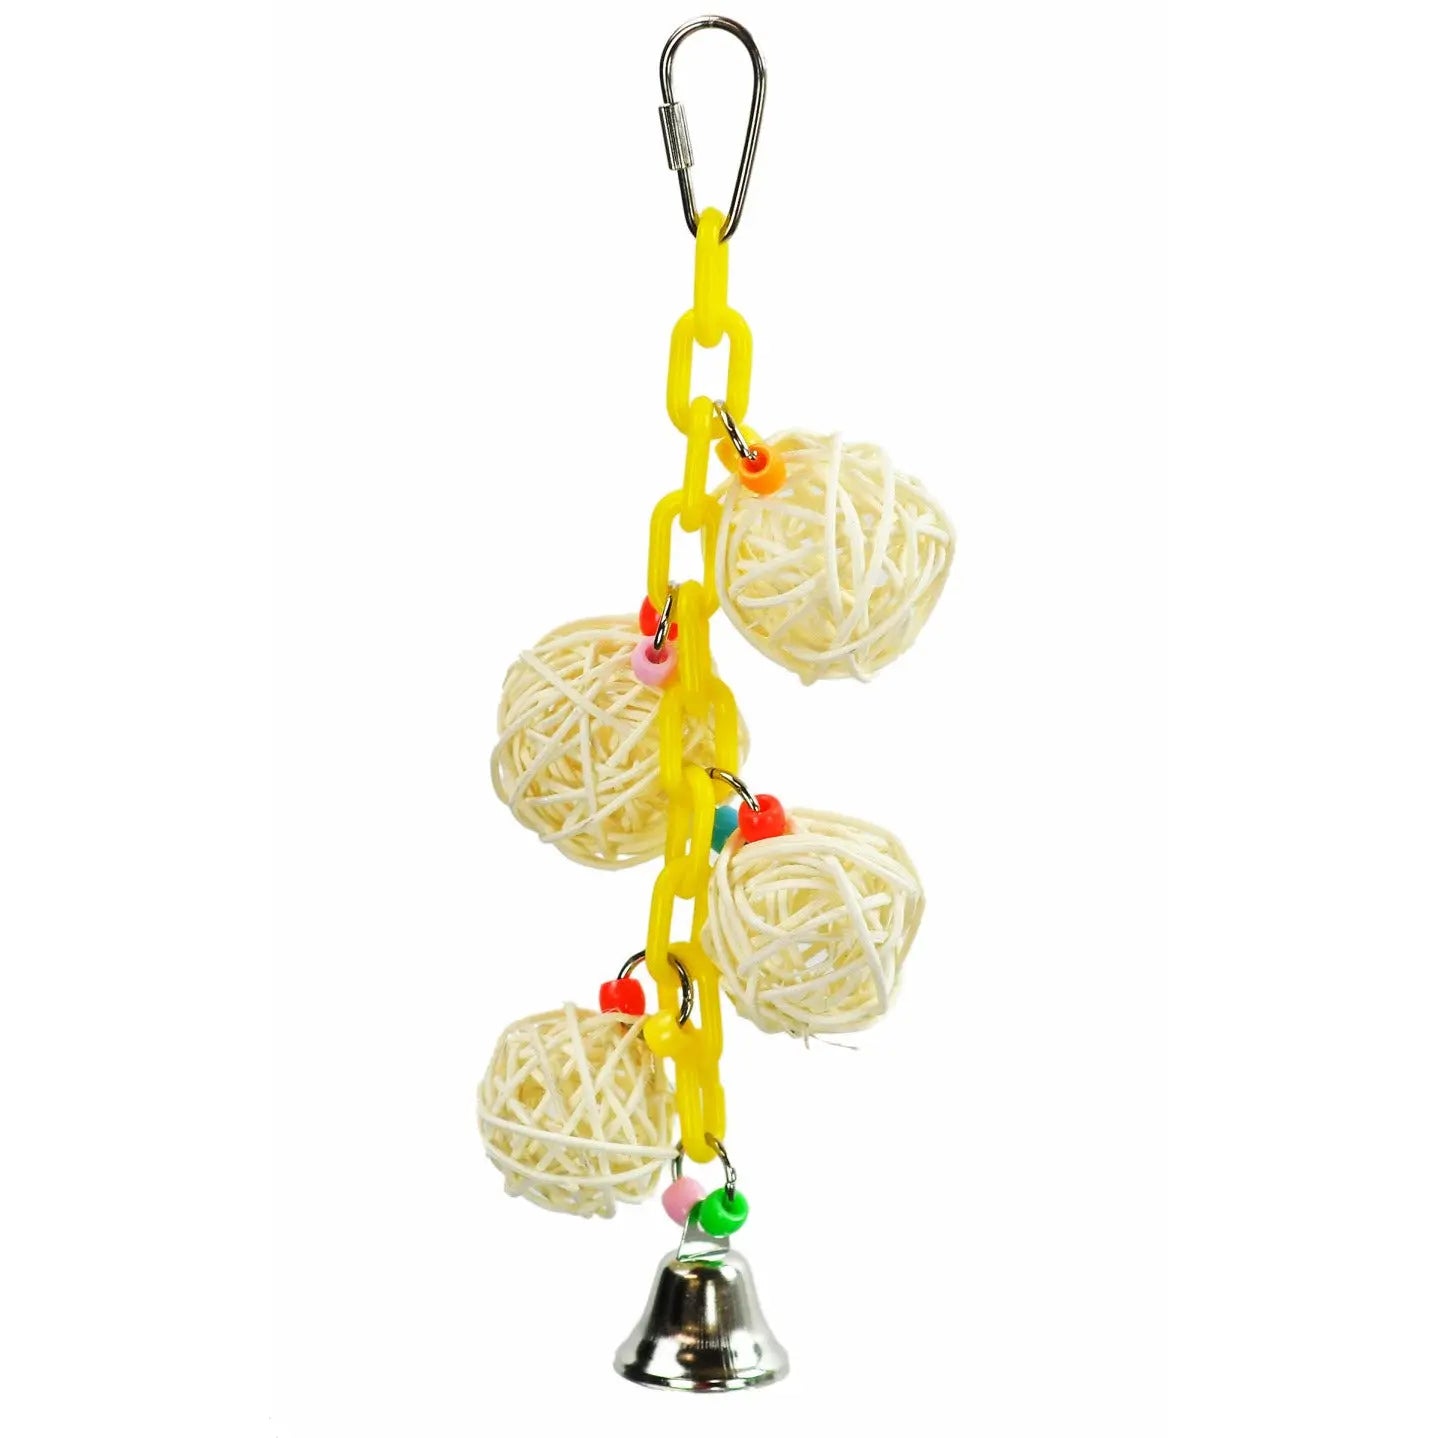 A & E Cages 4 Vine Balls on Chain with Bell Bird Toy AE Cage Company